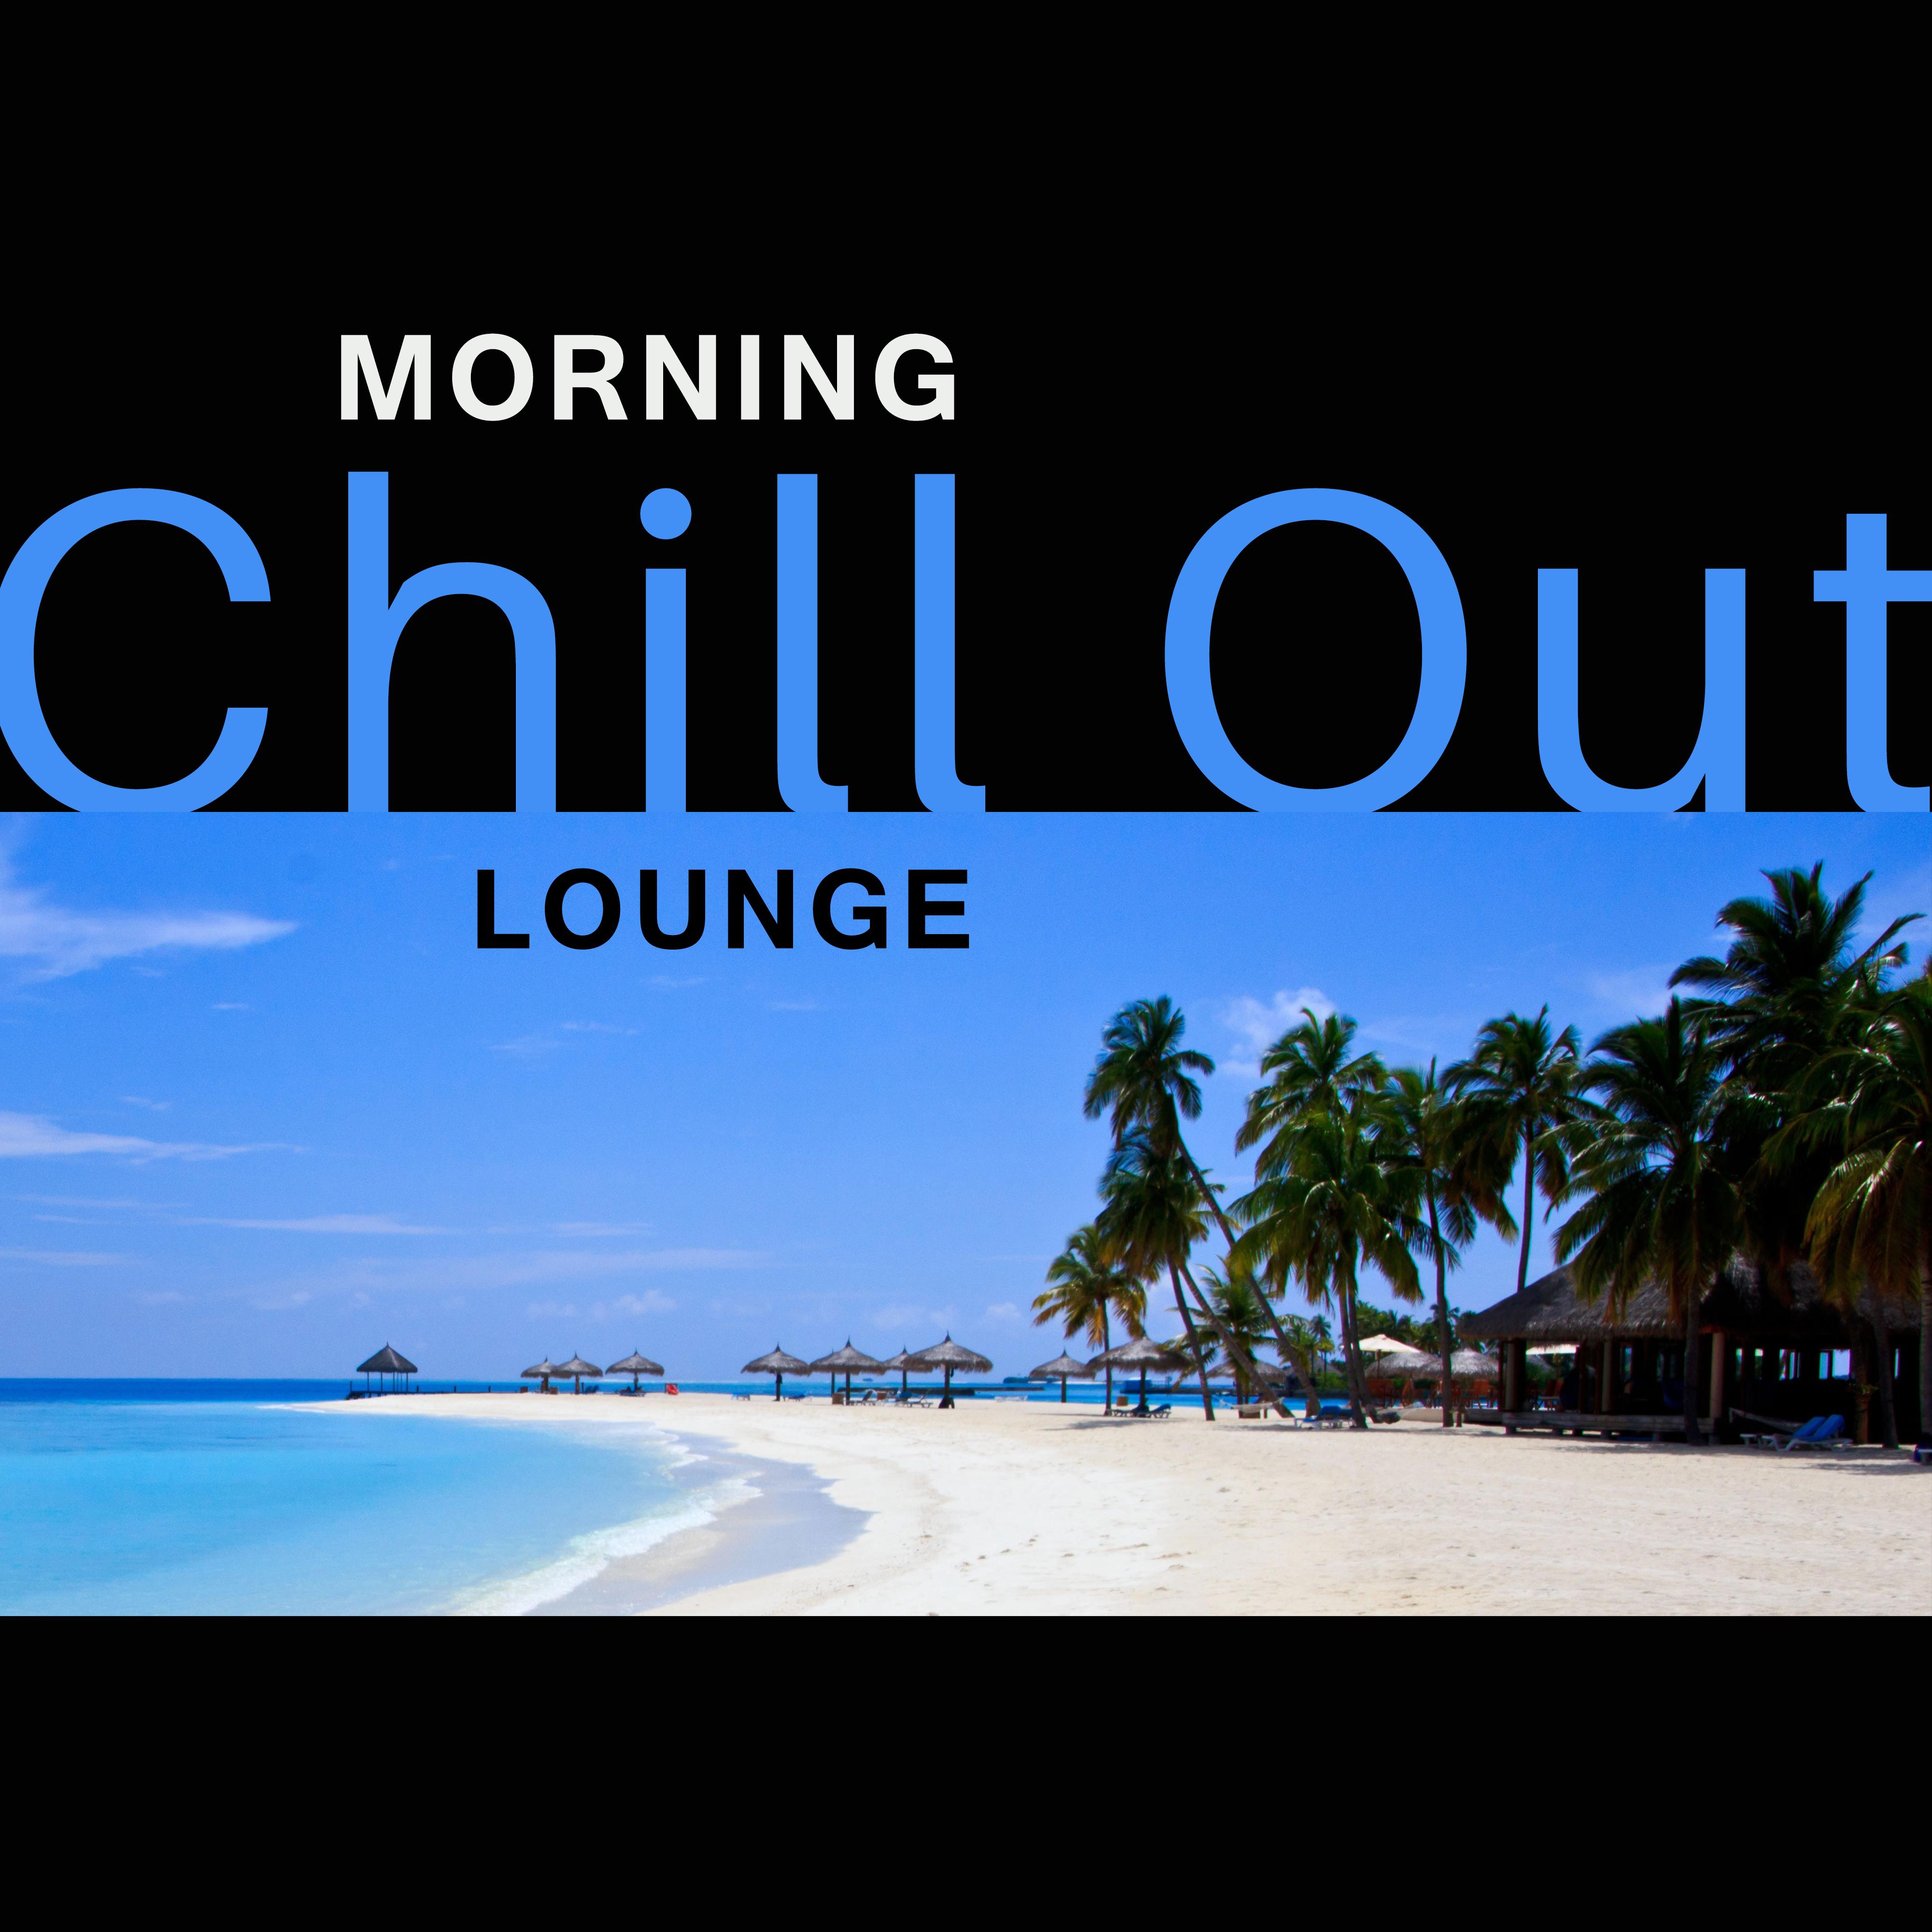 Morning Chill Out Lounge  Soft Songs to Relax, Easy Listening, Chilled Morning, Wake Up with Chill Out